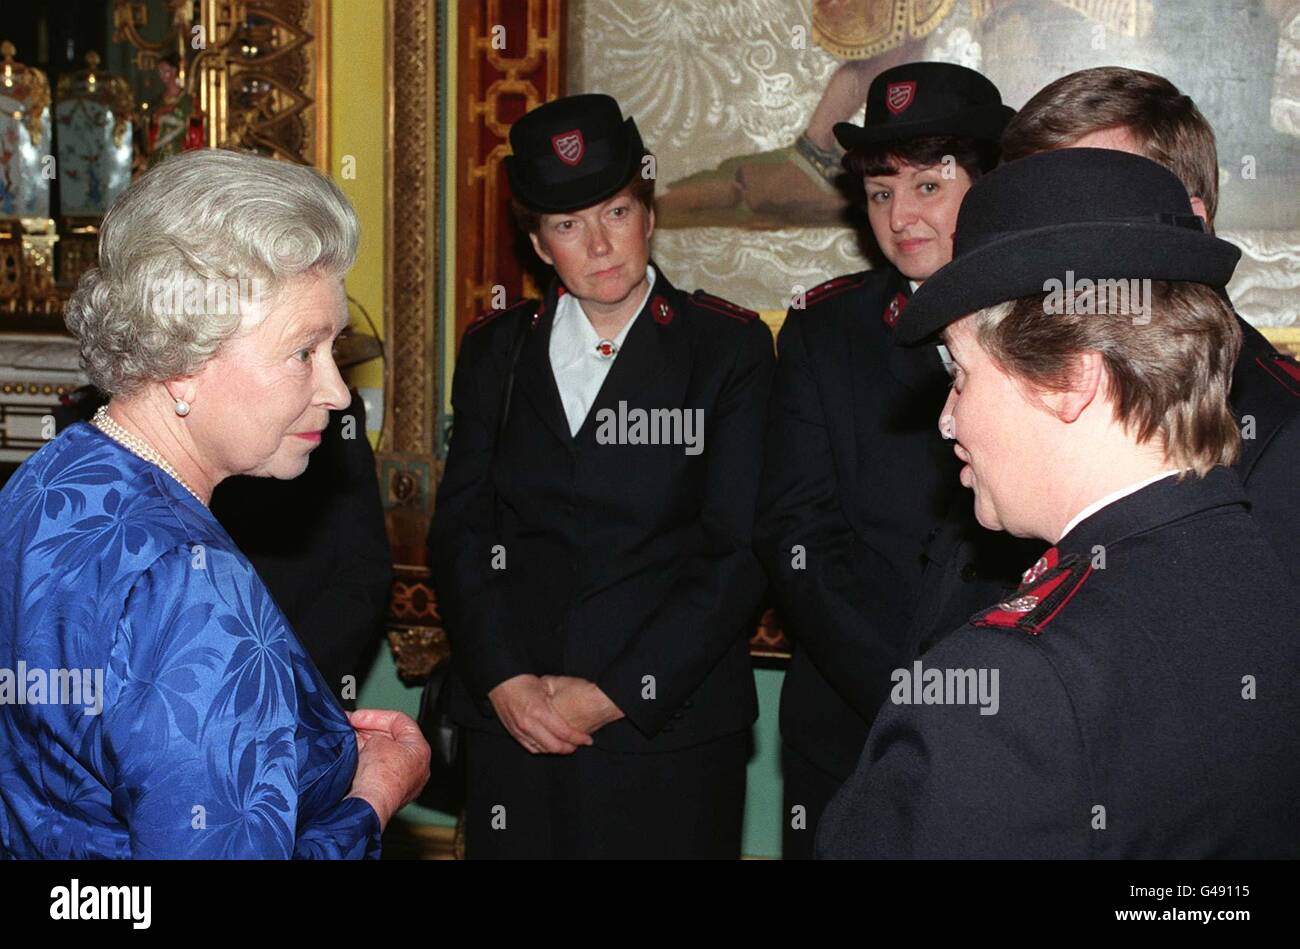 Queen/and salvation army members Stock Photo